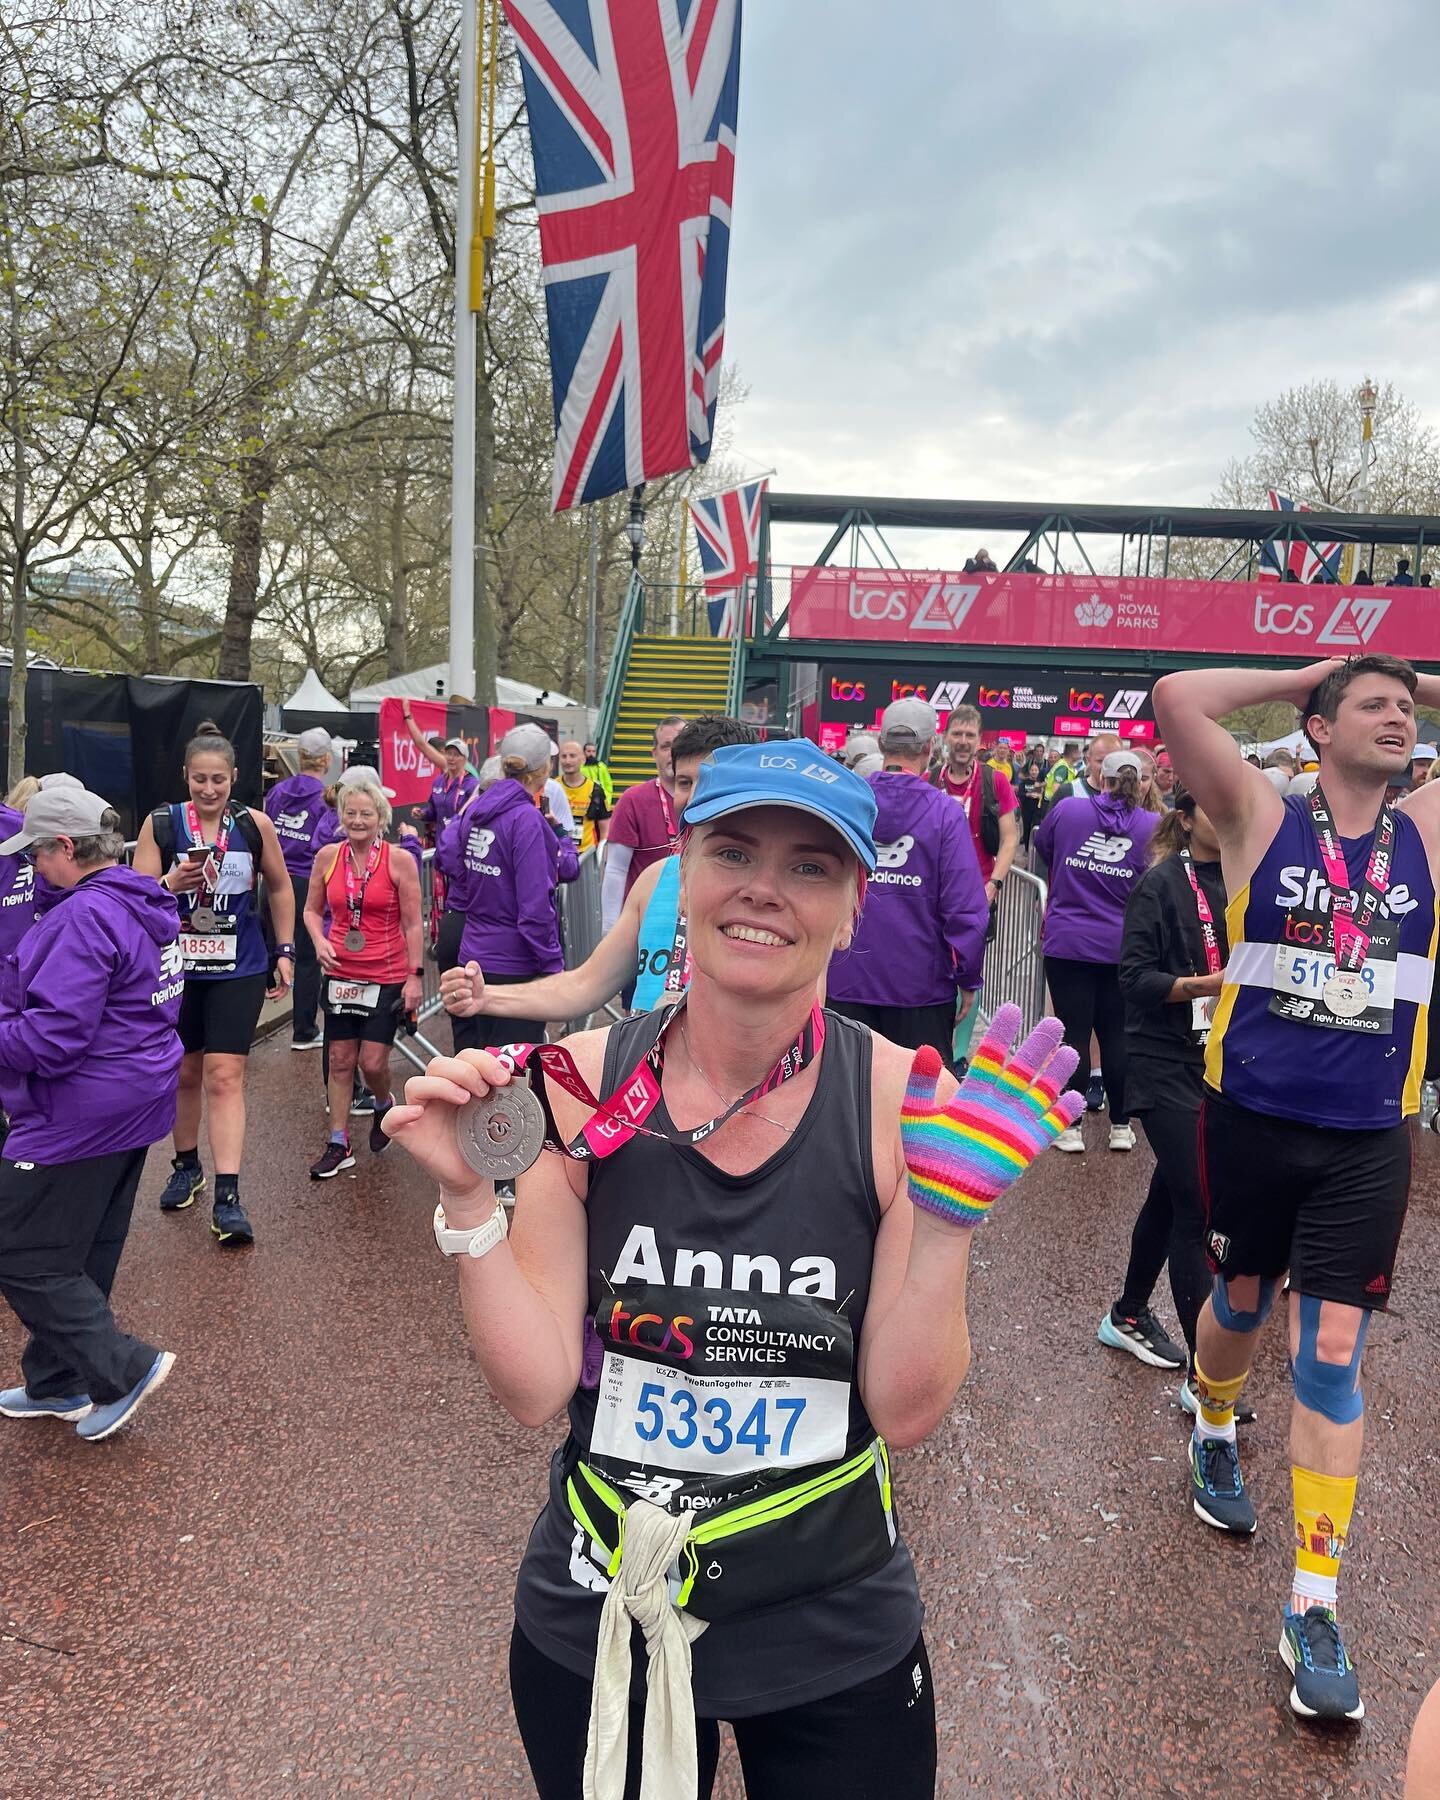 On the finish line of an incredible race @londonmarathon &hellip; at this point my legs did not function anymore, my hands were cold even through the gloves I wore throughout and it was still raining BUT I was joyful. What an experience, a once in a 